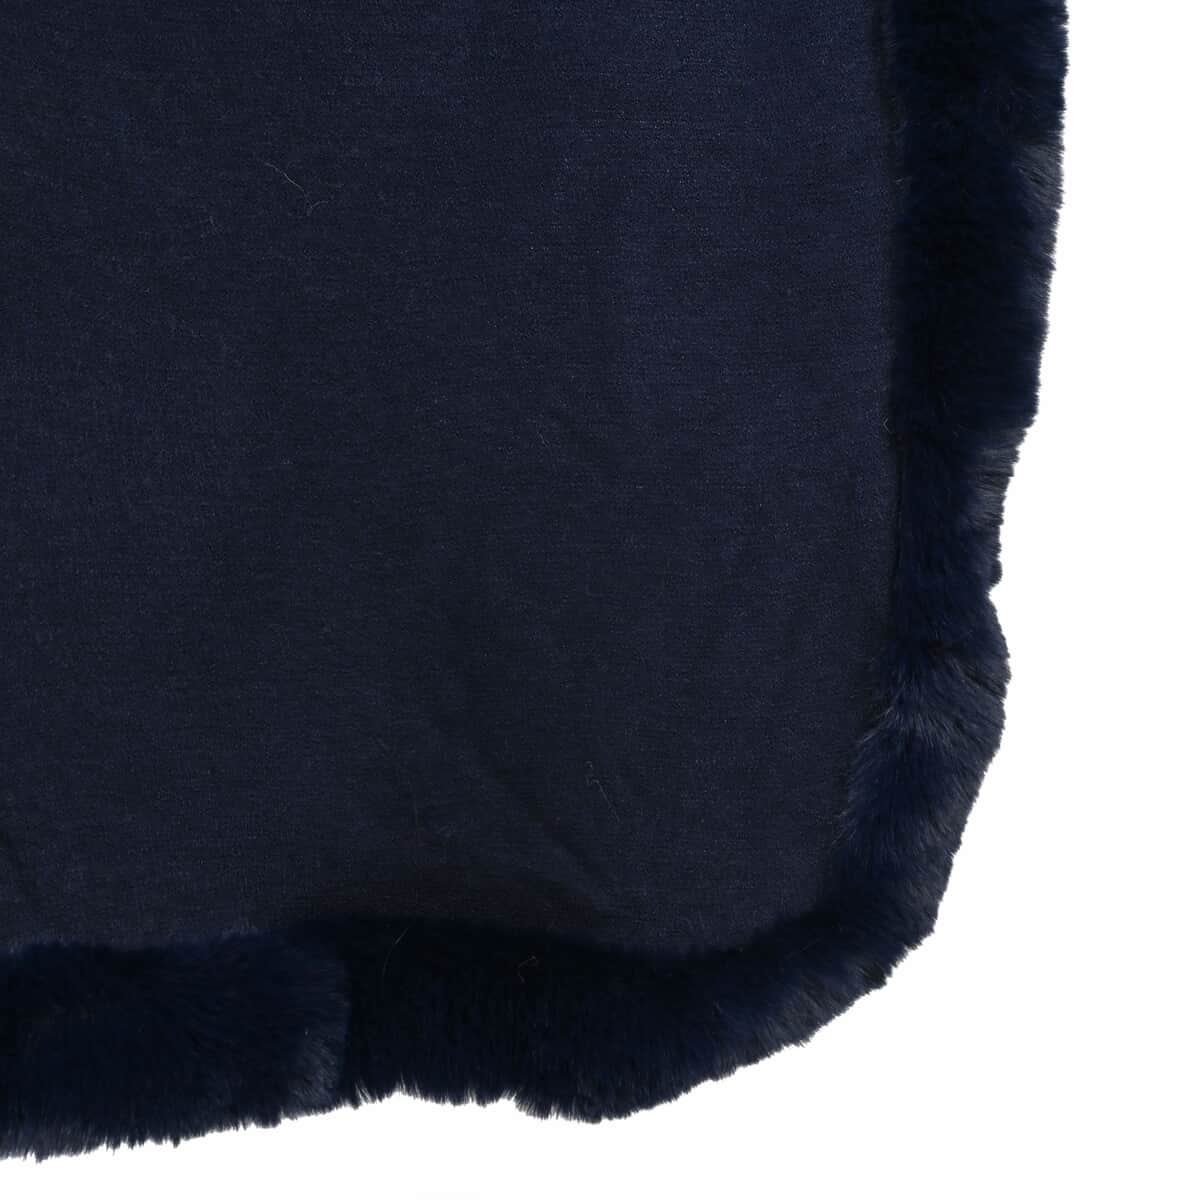 Designer Inspired Navy Ruana with Faux Fur Trim - One Size Fits Most image number 4